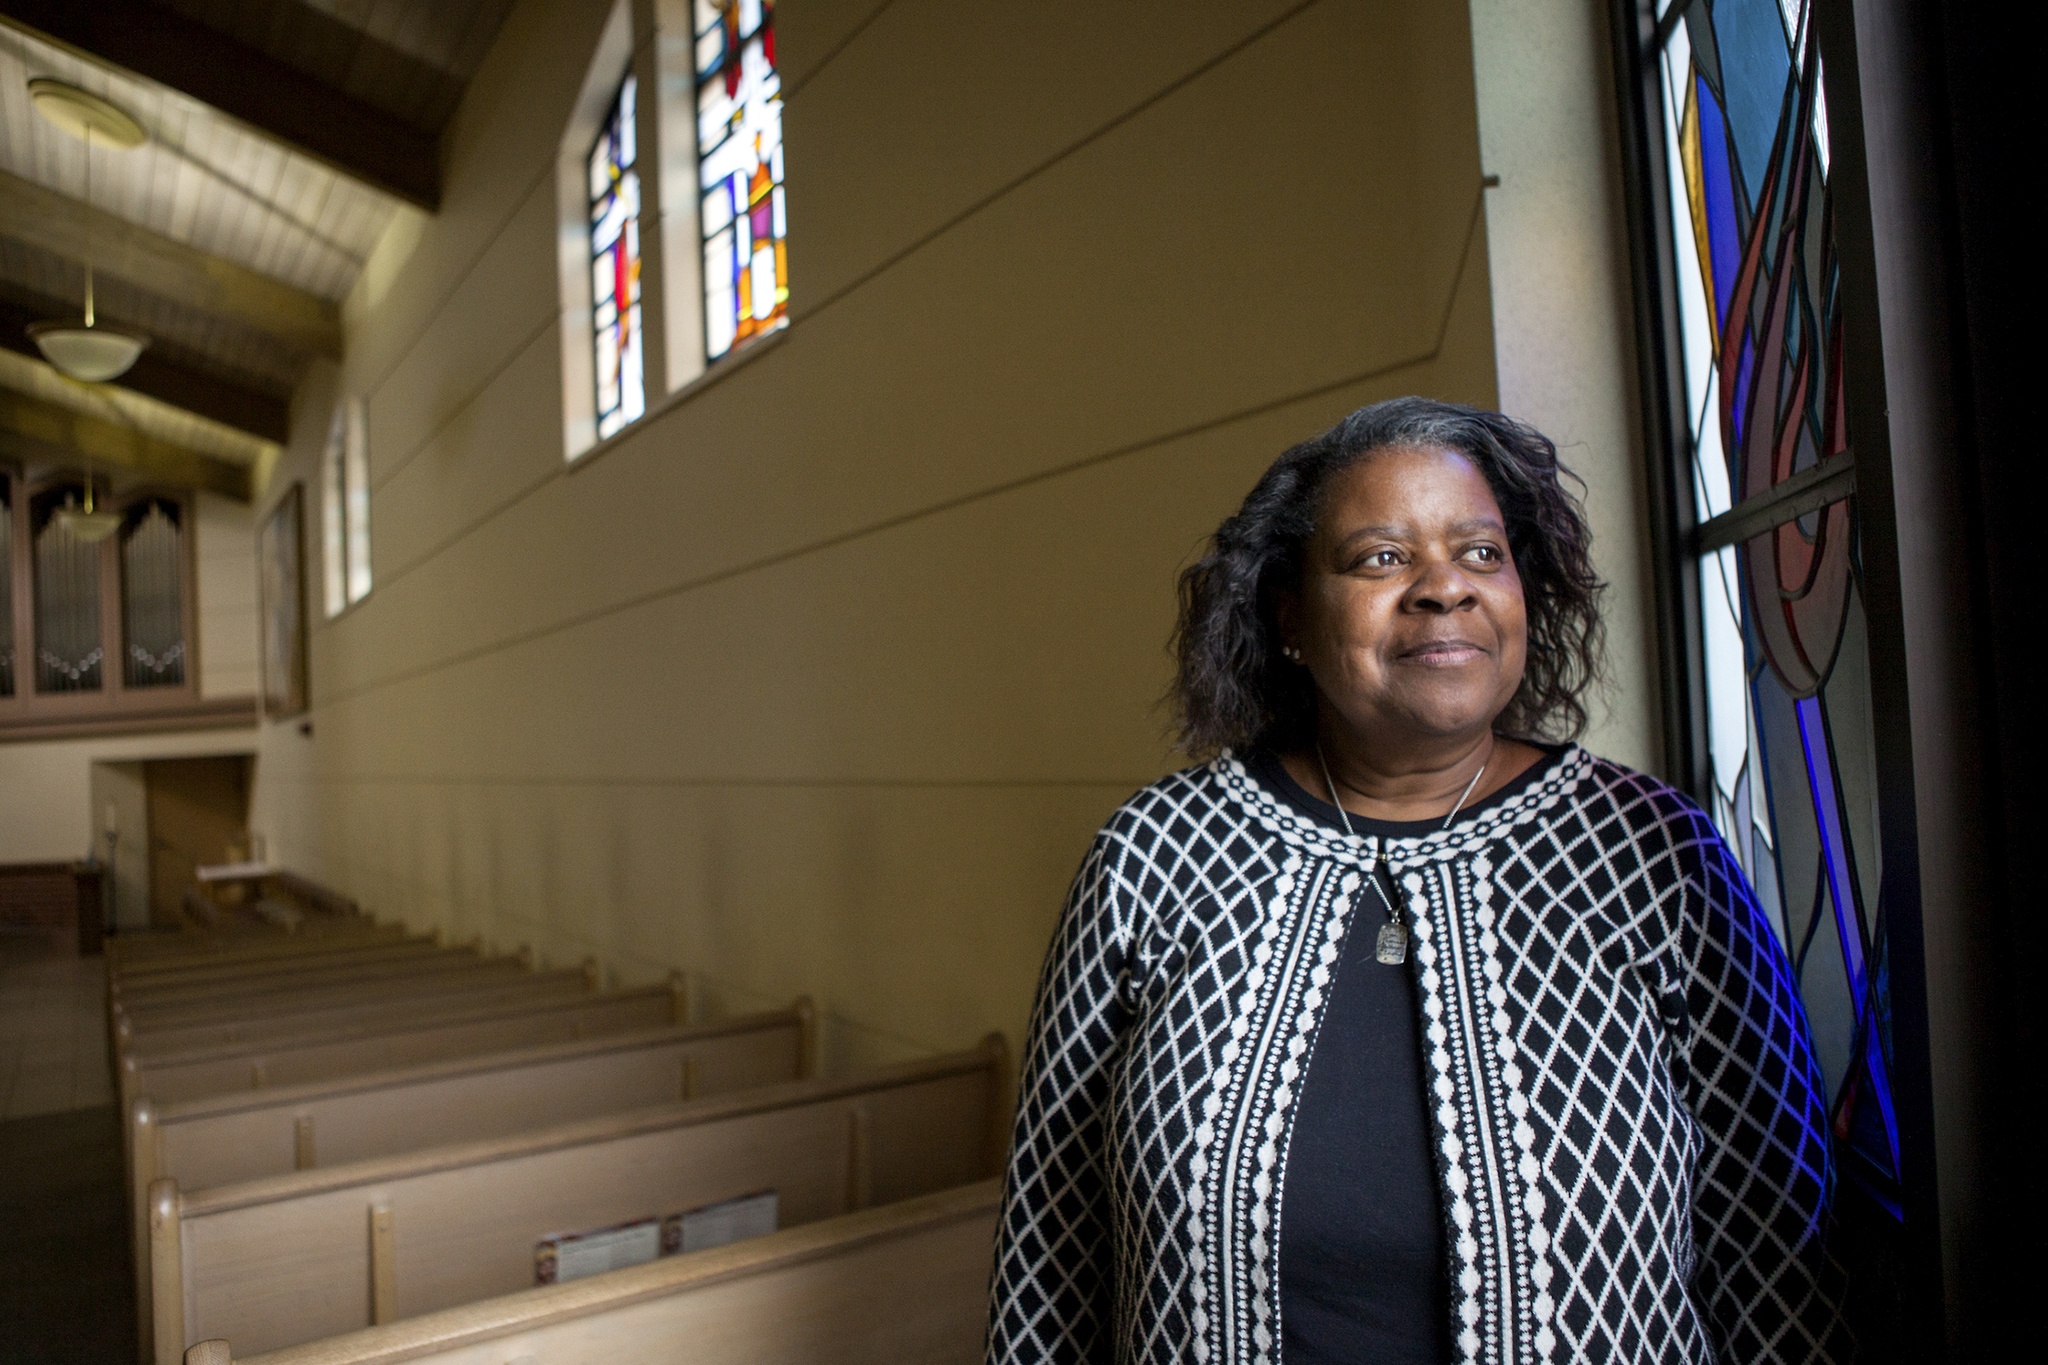 City Councilmember Brenda Fincher poses for a portrait at Holy Spirit Parish in Kent, Washington on December 9, 2016.